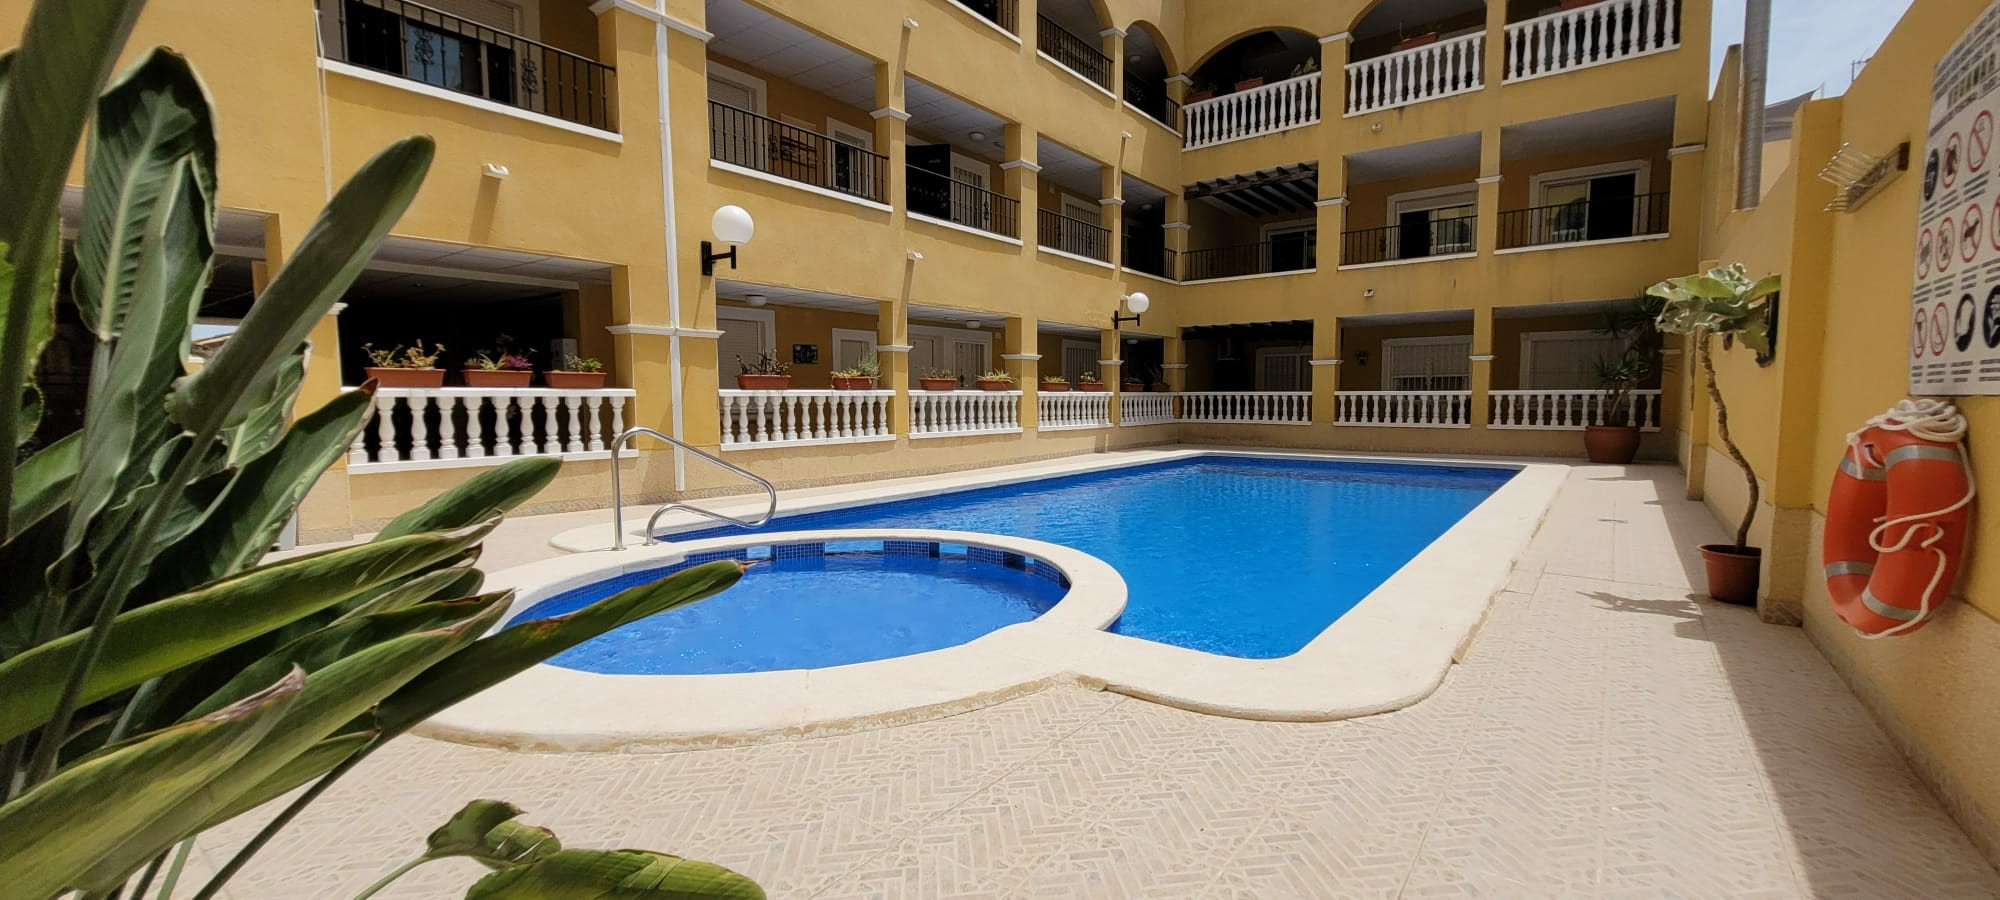 For sale: 2 bedroom apartment / flat in Rafal, Costa Blanca